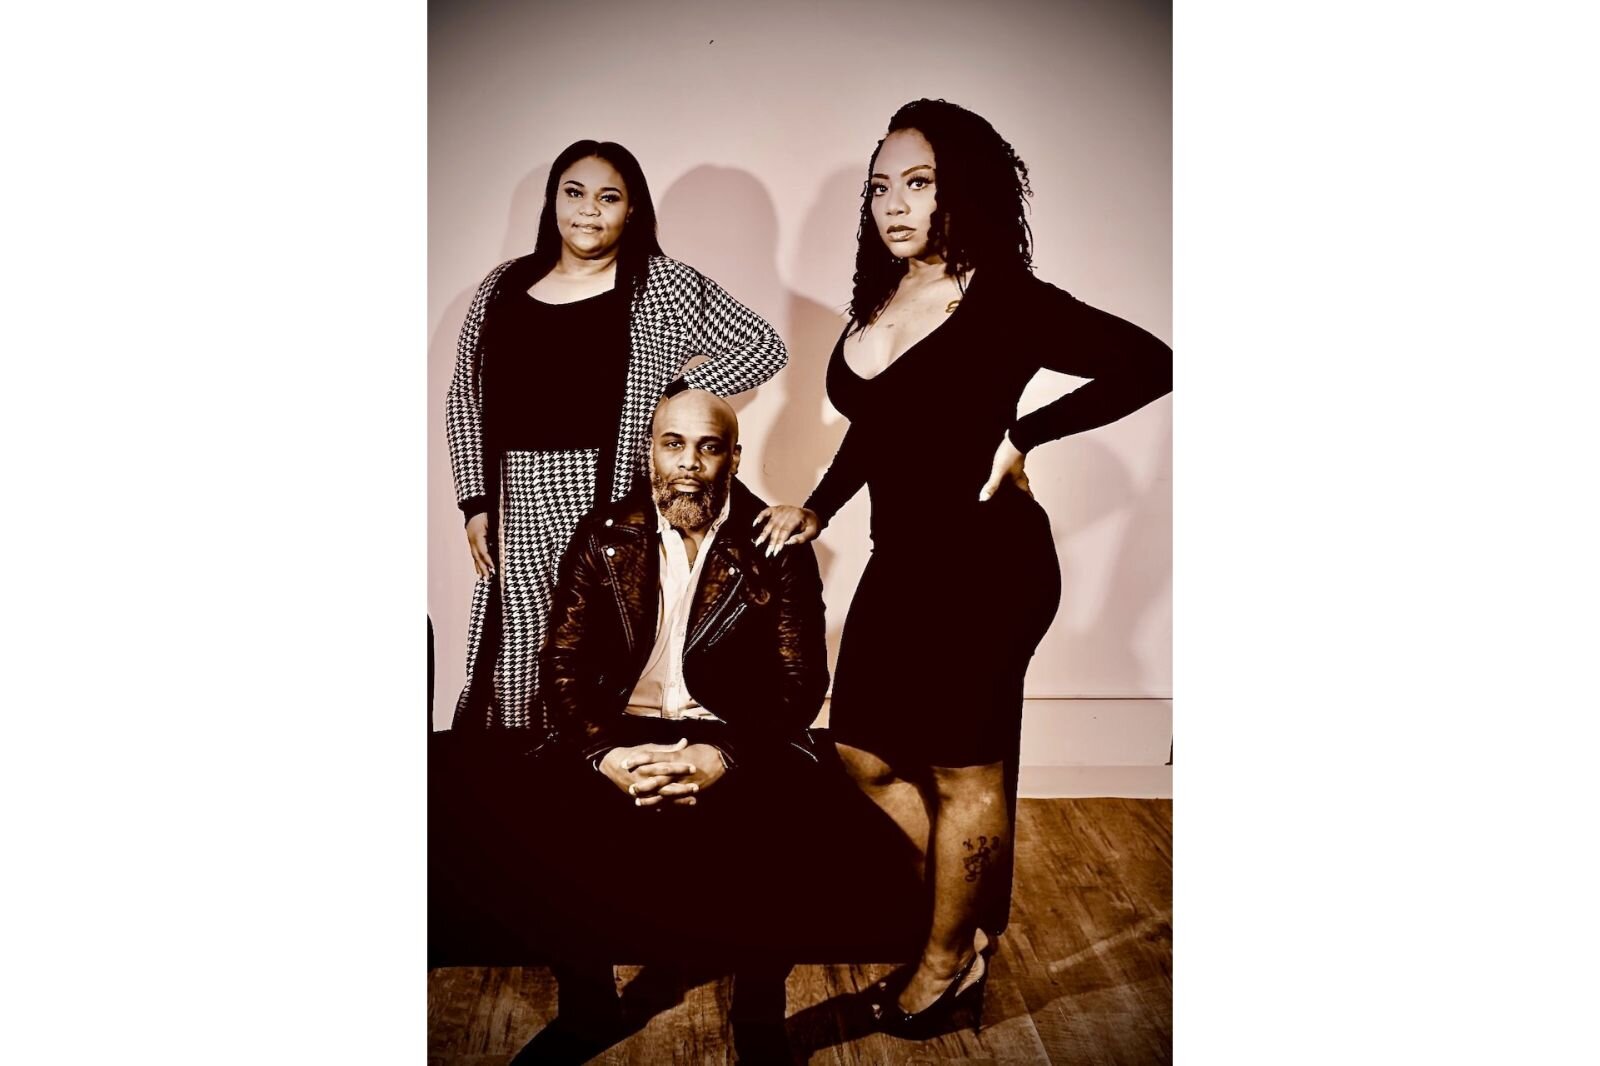  The Xperience by Luxury Escape asks people to put some effort into what they wear when they come to events. Bryan Sims sits between business partners Symphony Ollie, left, and Kim Guess.